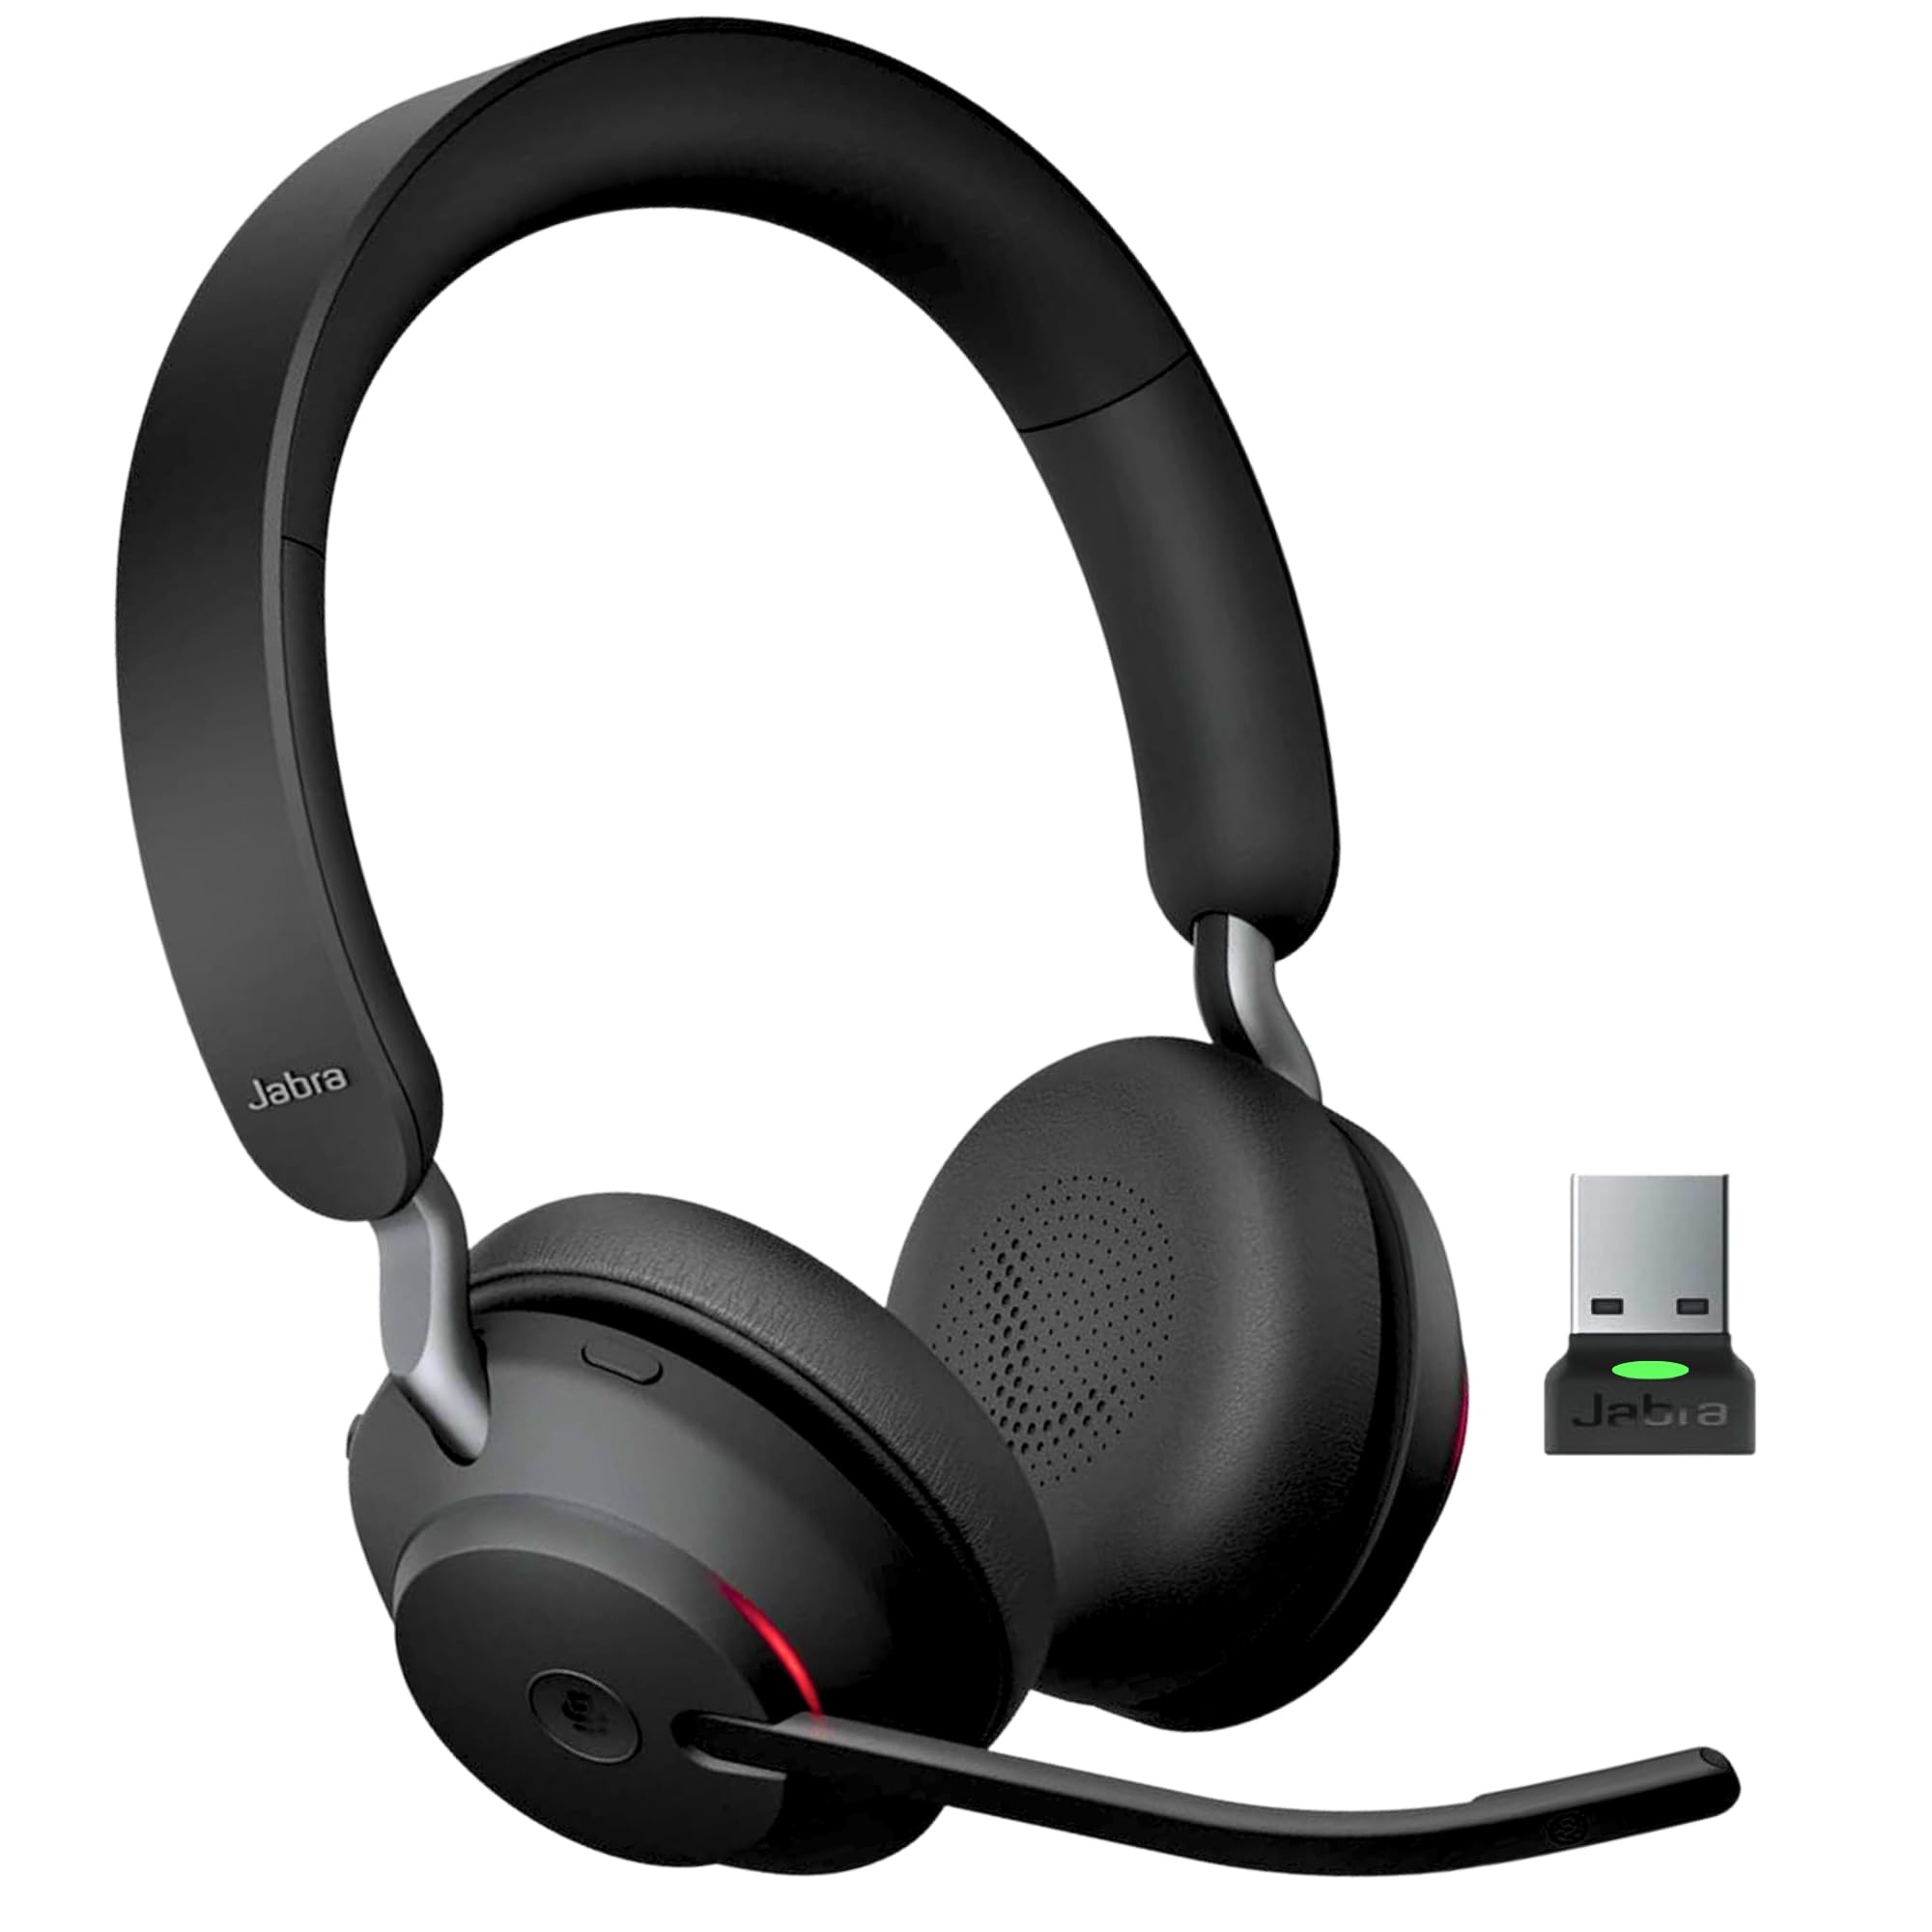 Step-by-Step: Pairing Jabra Headset With USB Dongle